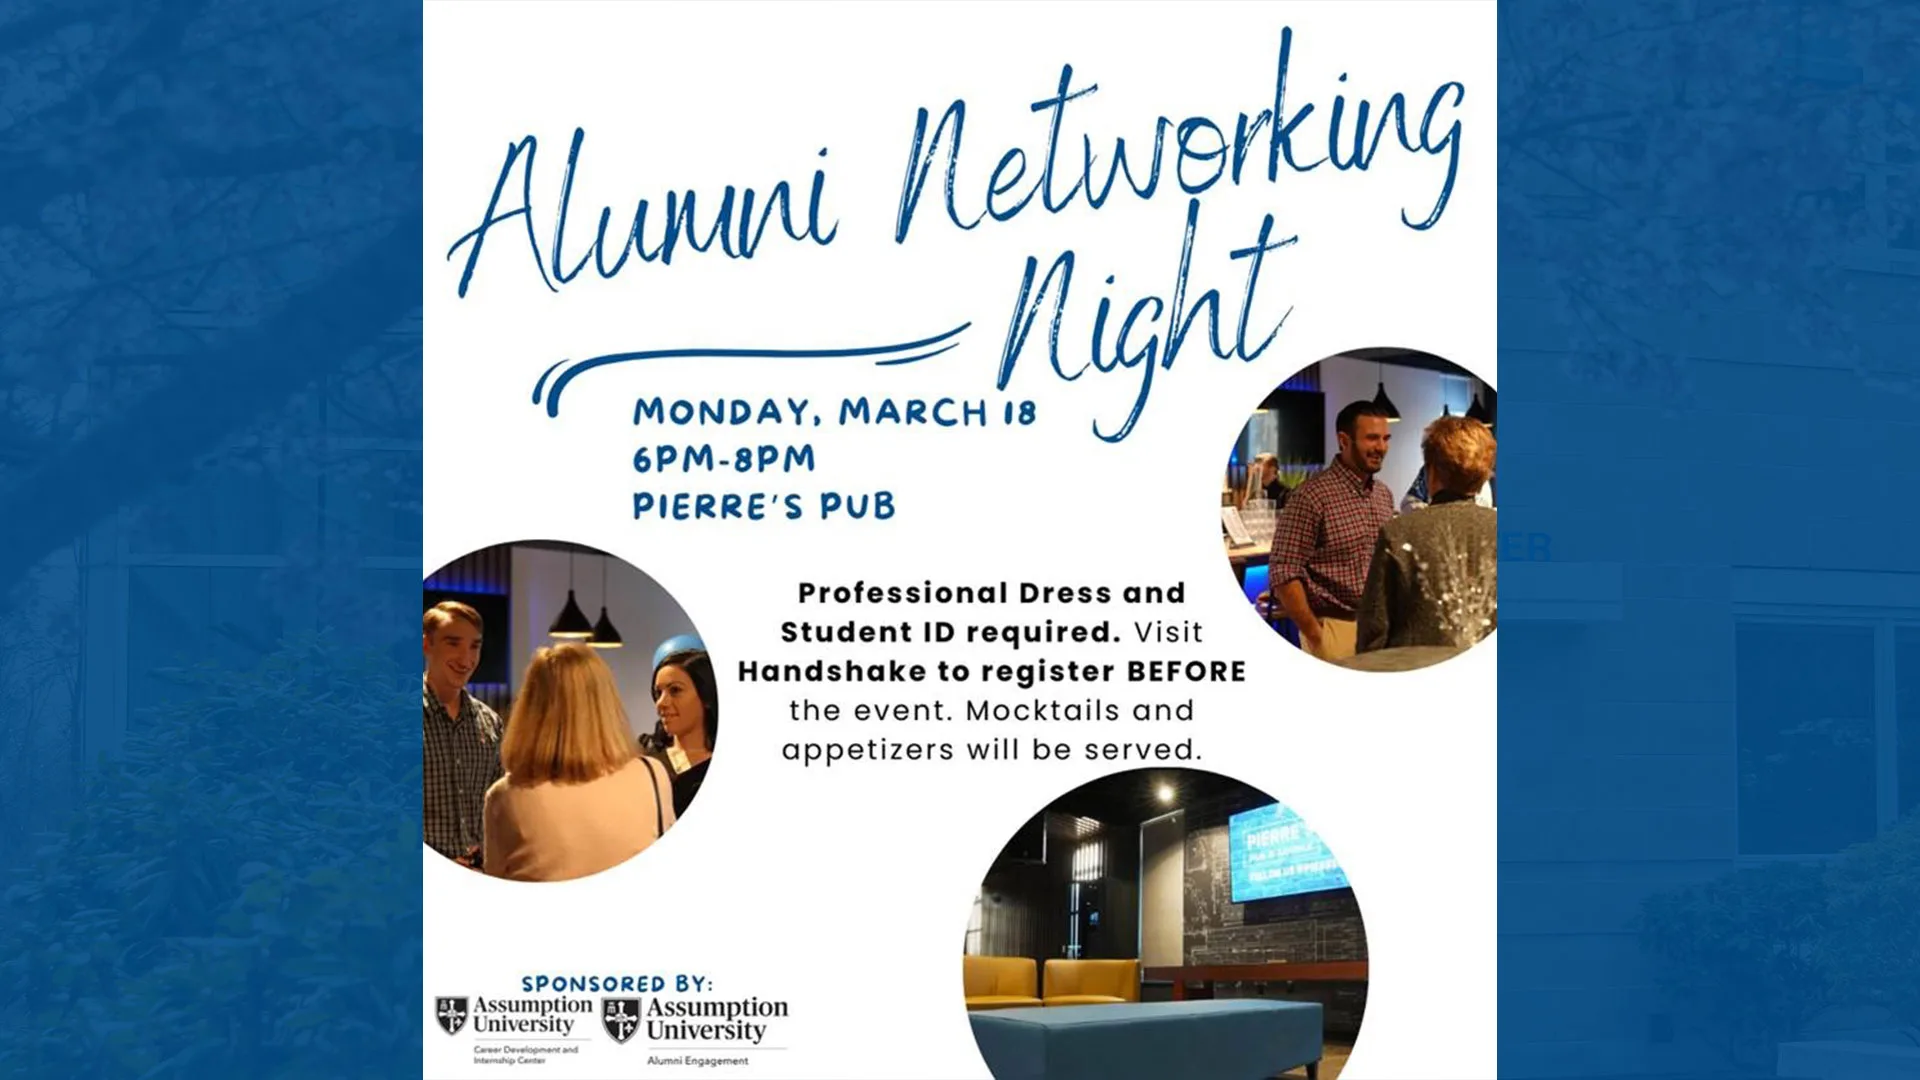 Poster for Alumni and Student Networking Night on March 18